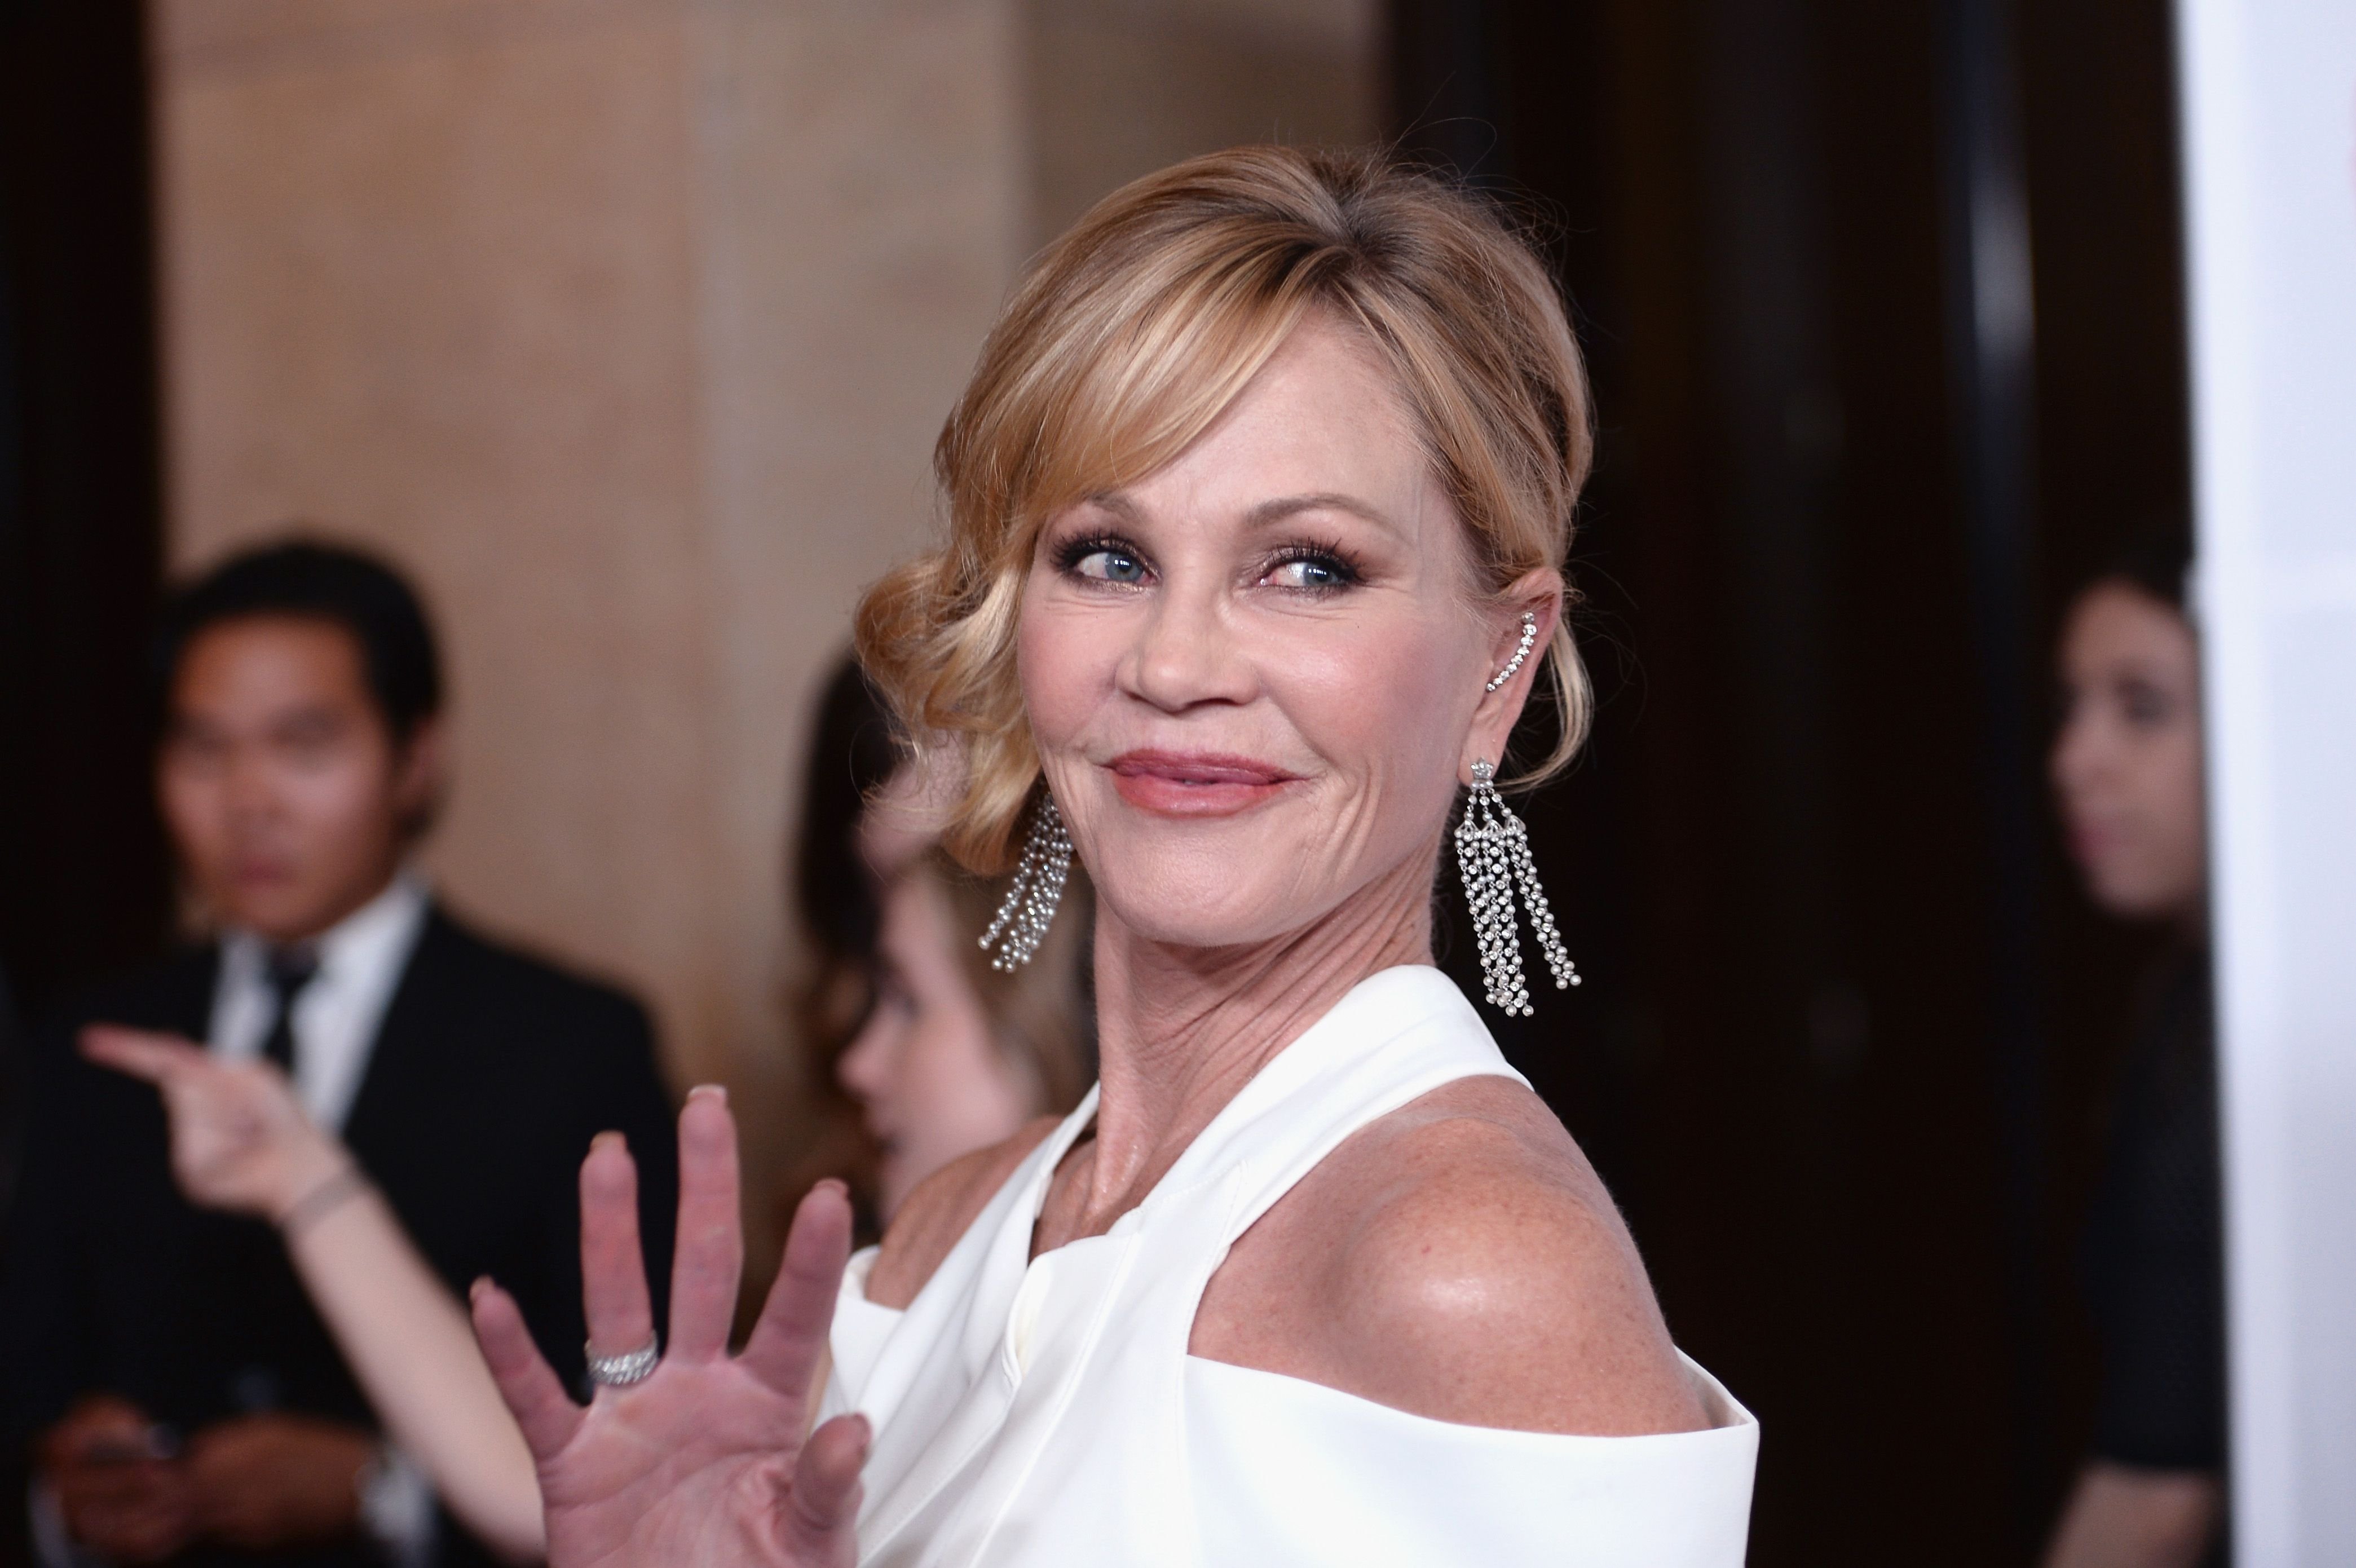 Melanie Griffith at the 2016 Carousel Of Hope Ball in Beverly Hills | Source: Getty Images